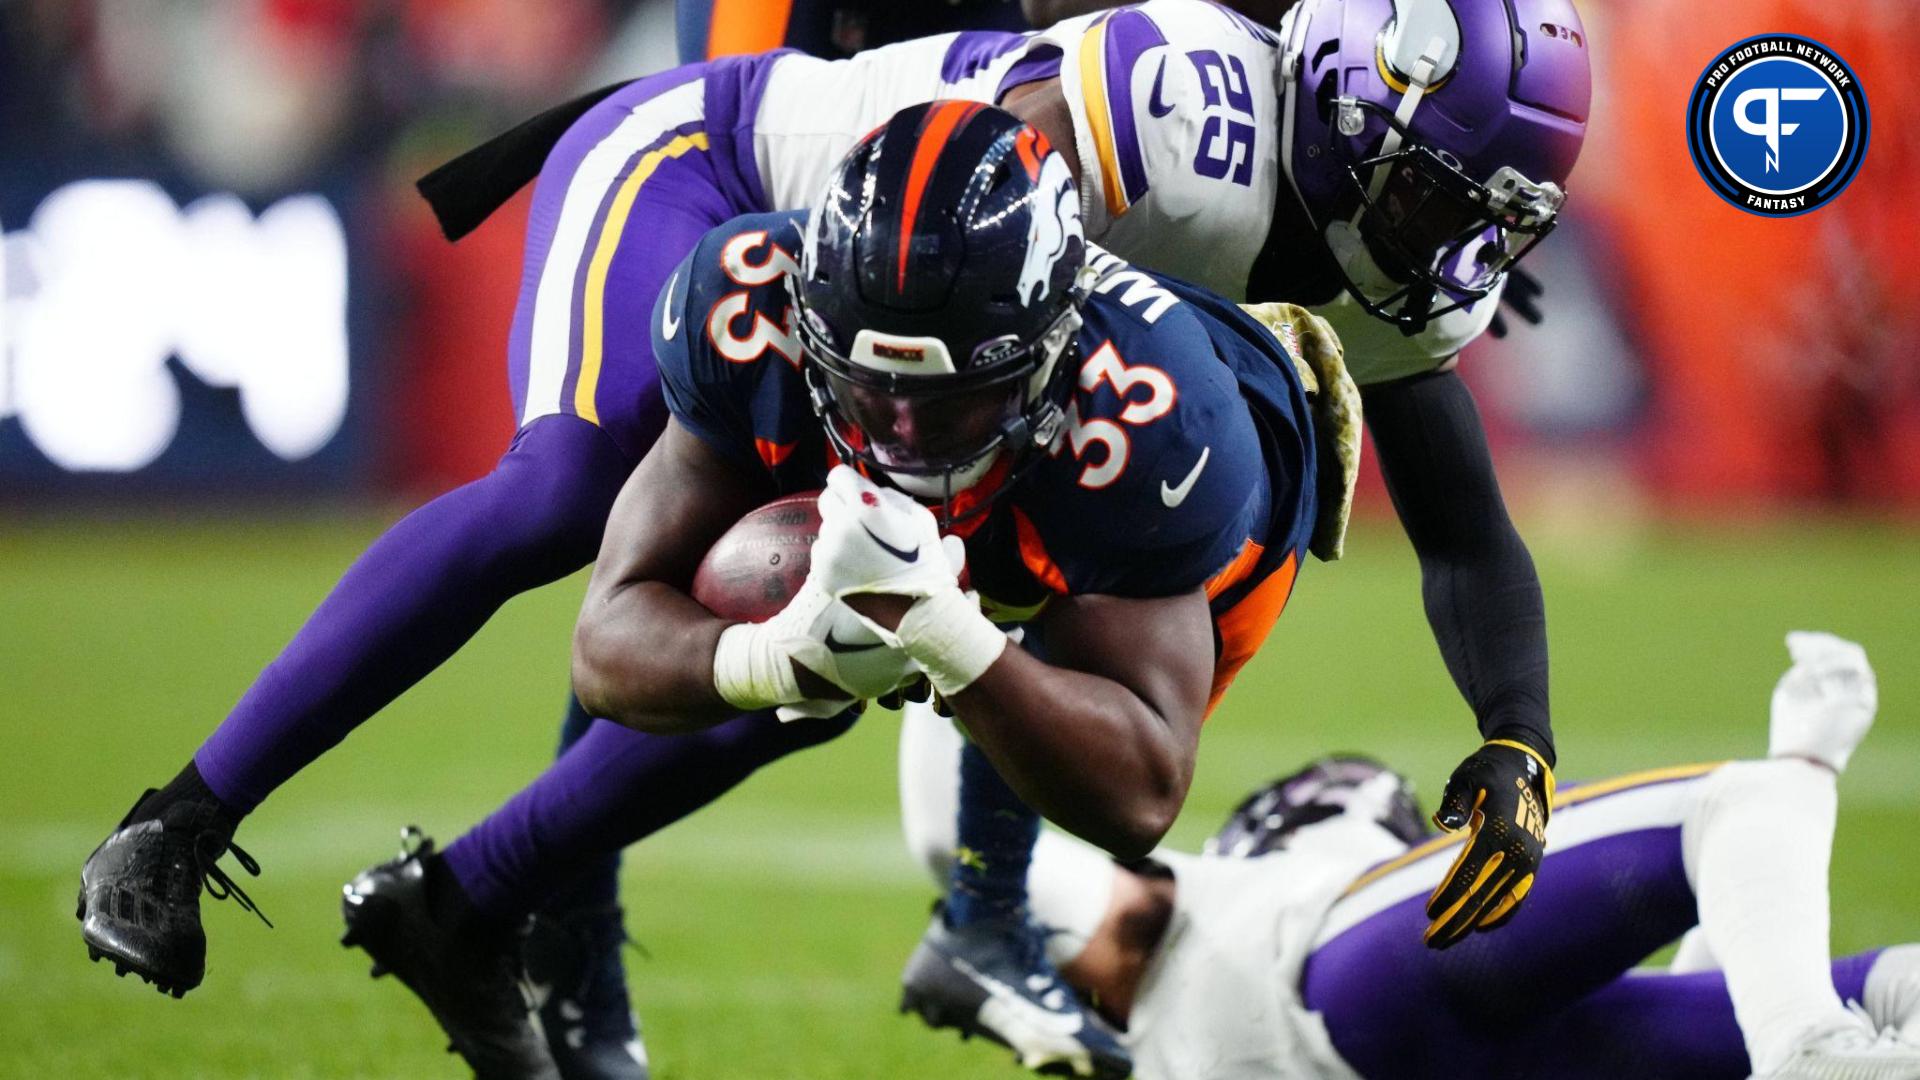 Minnesota Vikings safety Theo Jackson (25) tackles Denver Broncos running back Javonte Williams (33) in the fourth quarter at Empower Field at Mile High.